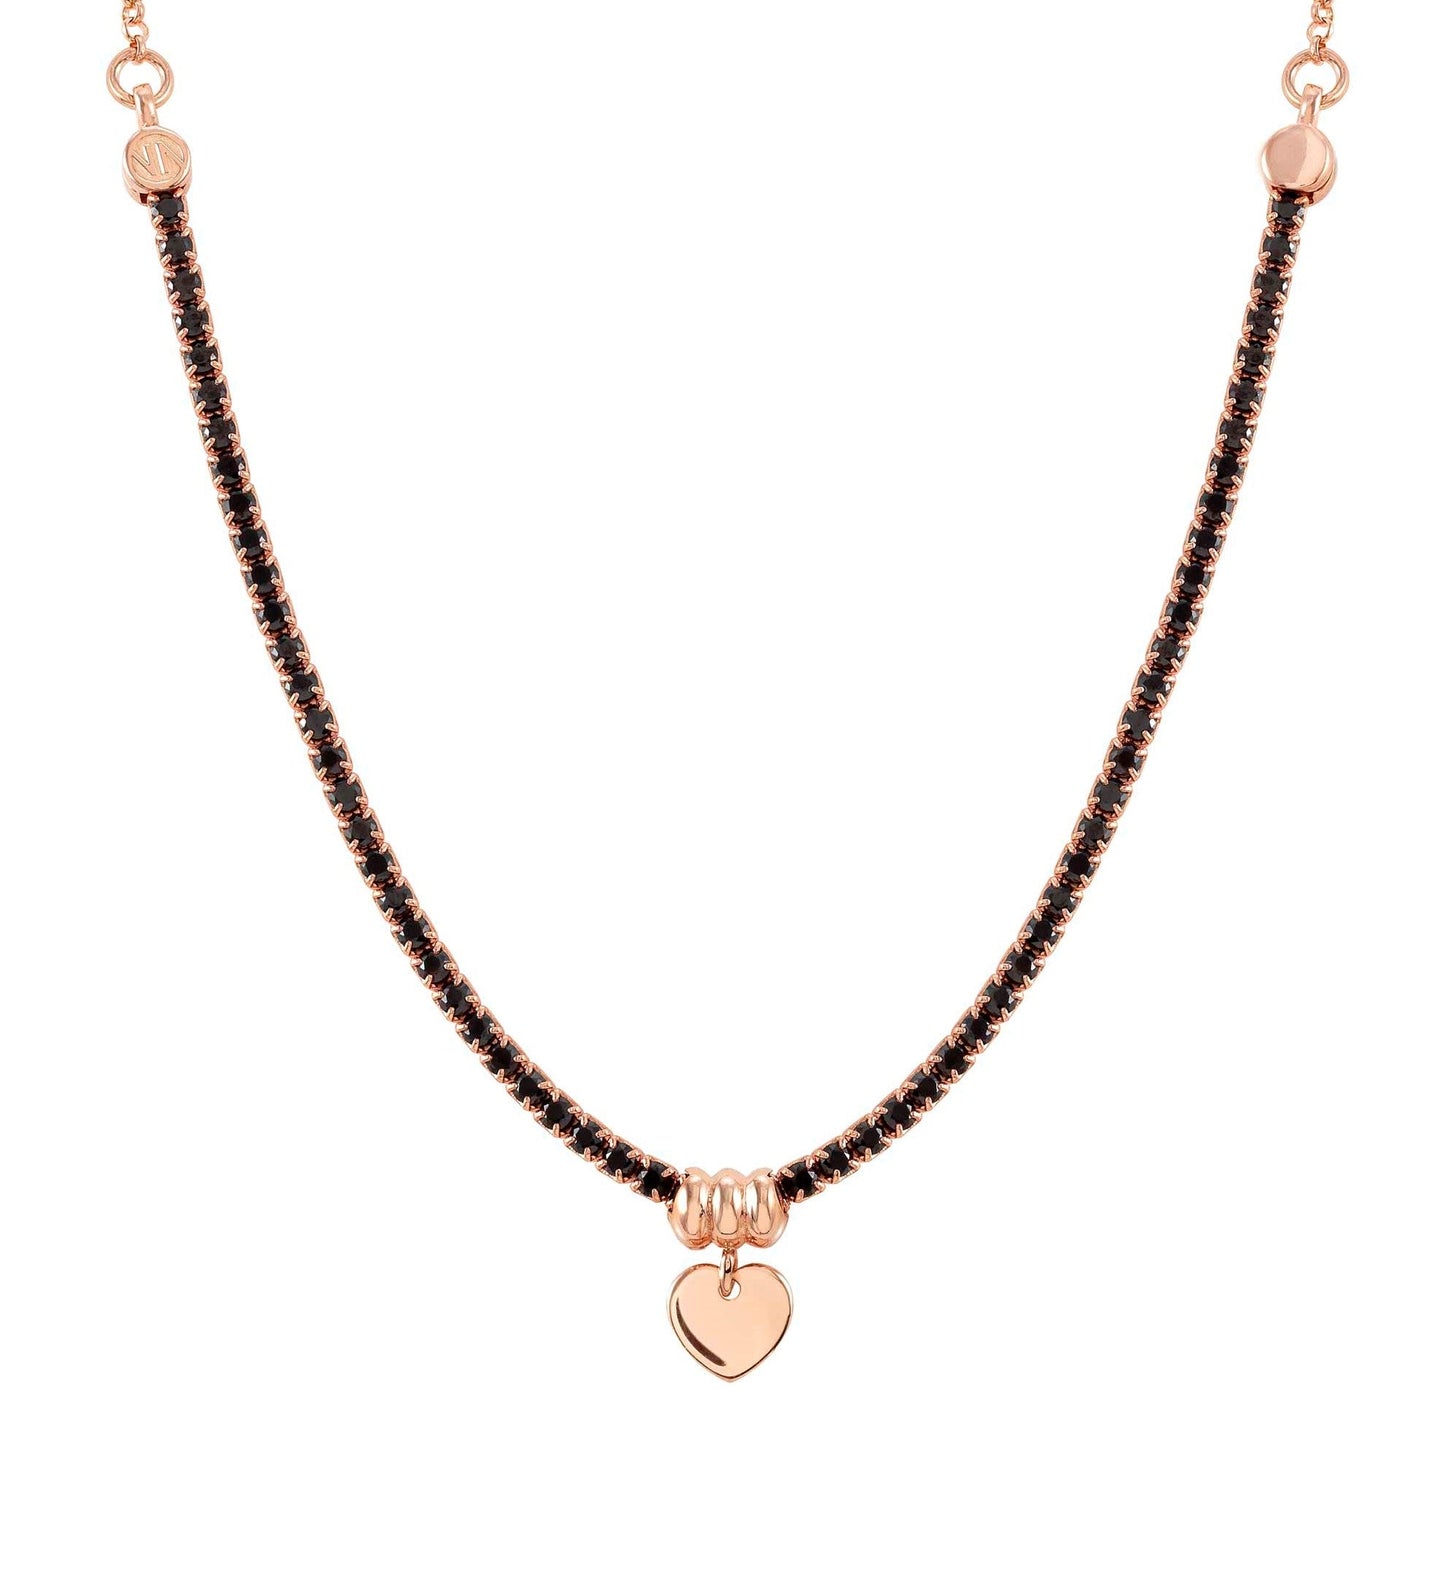 Nomination Chic & Charm Necklace with CZ Rose Heart in Rose Gold Tone